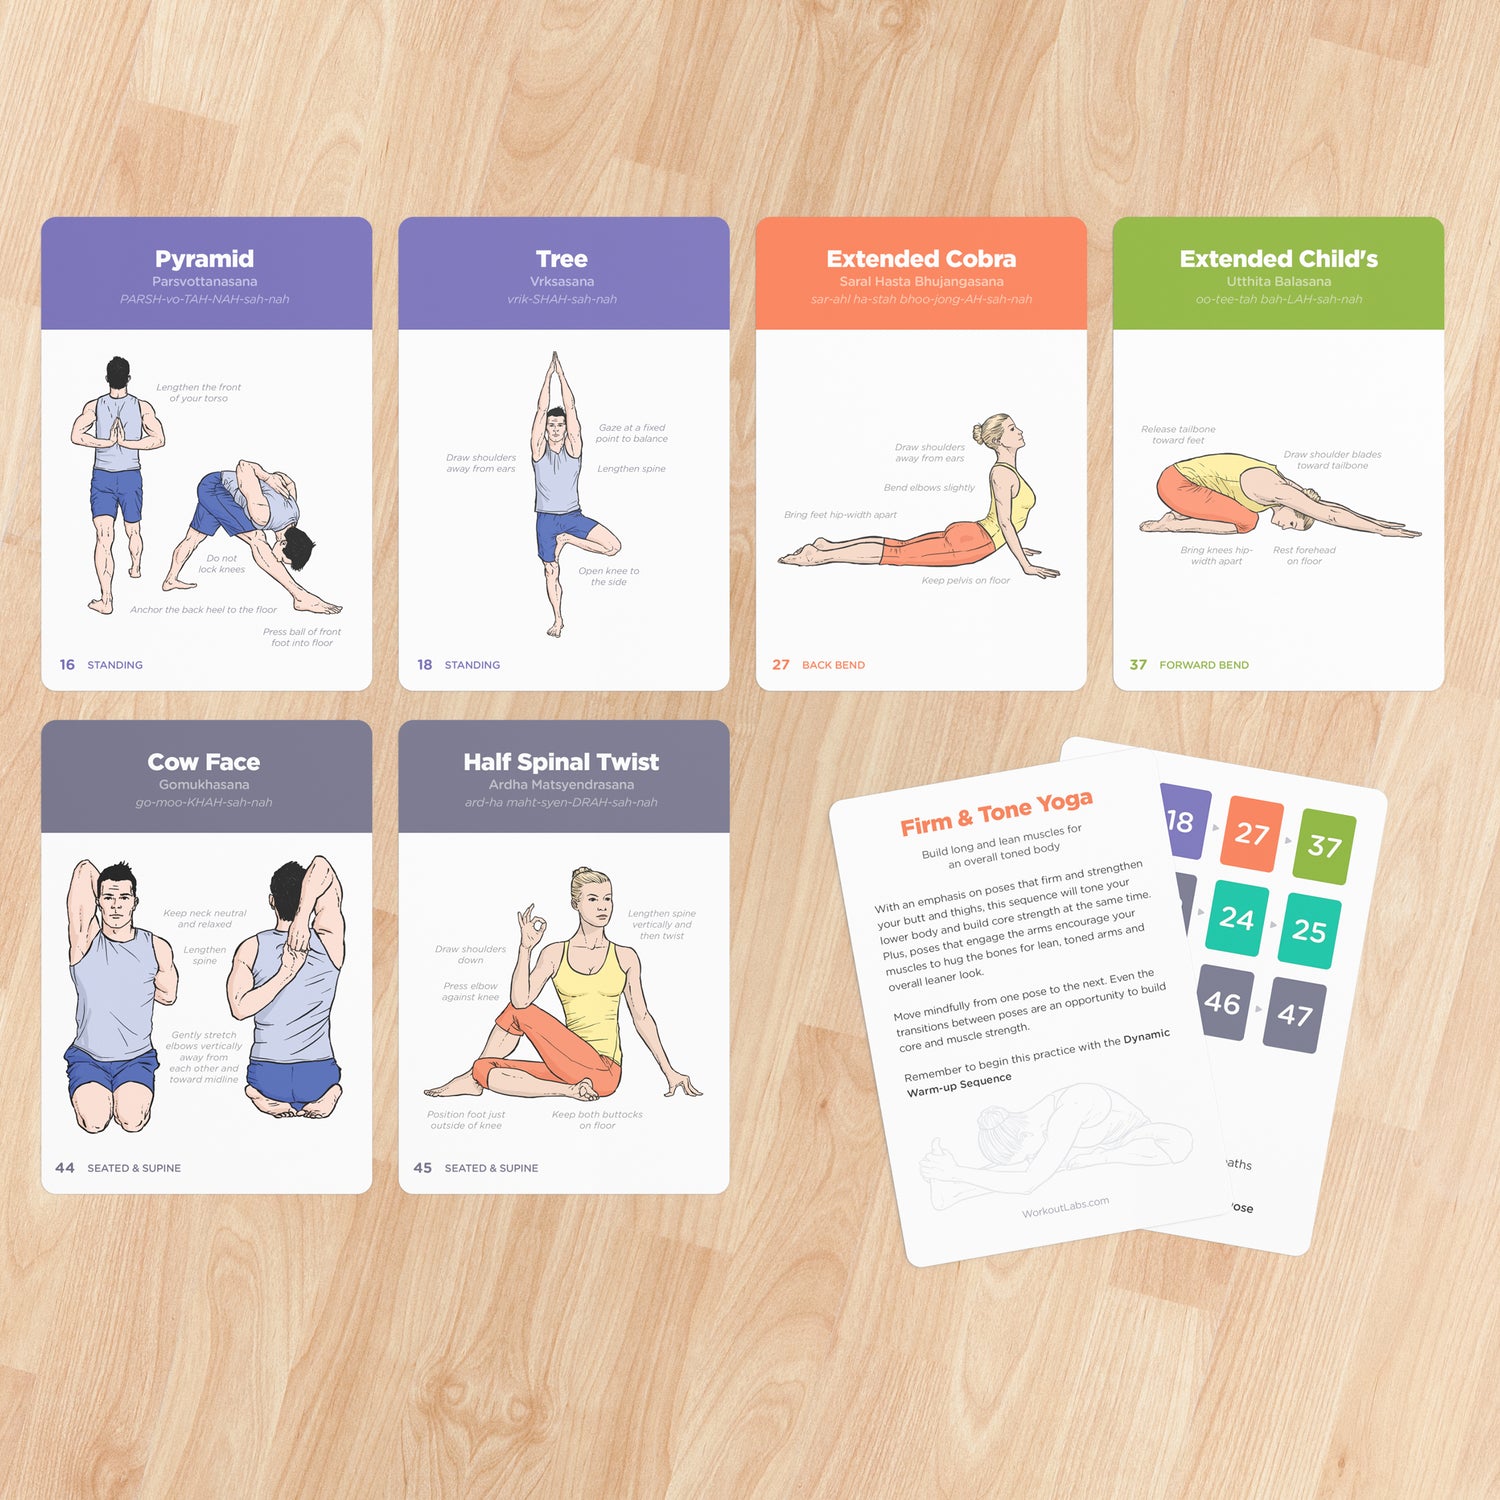 Yoga Cards for Beginners – Study, Practice & Sequencing